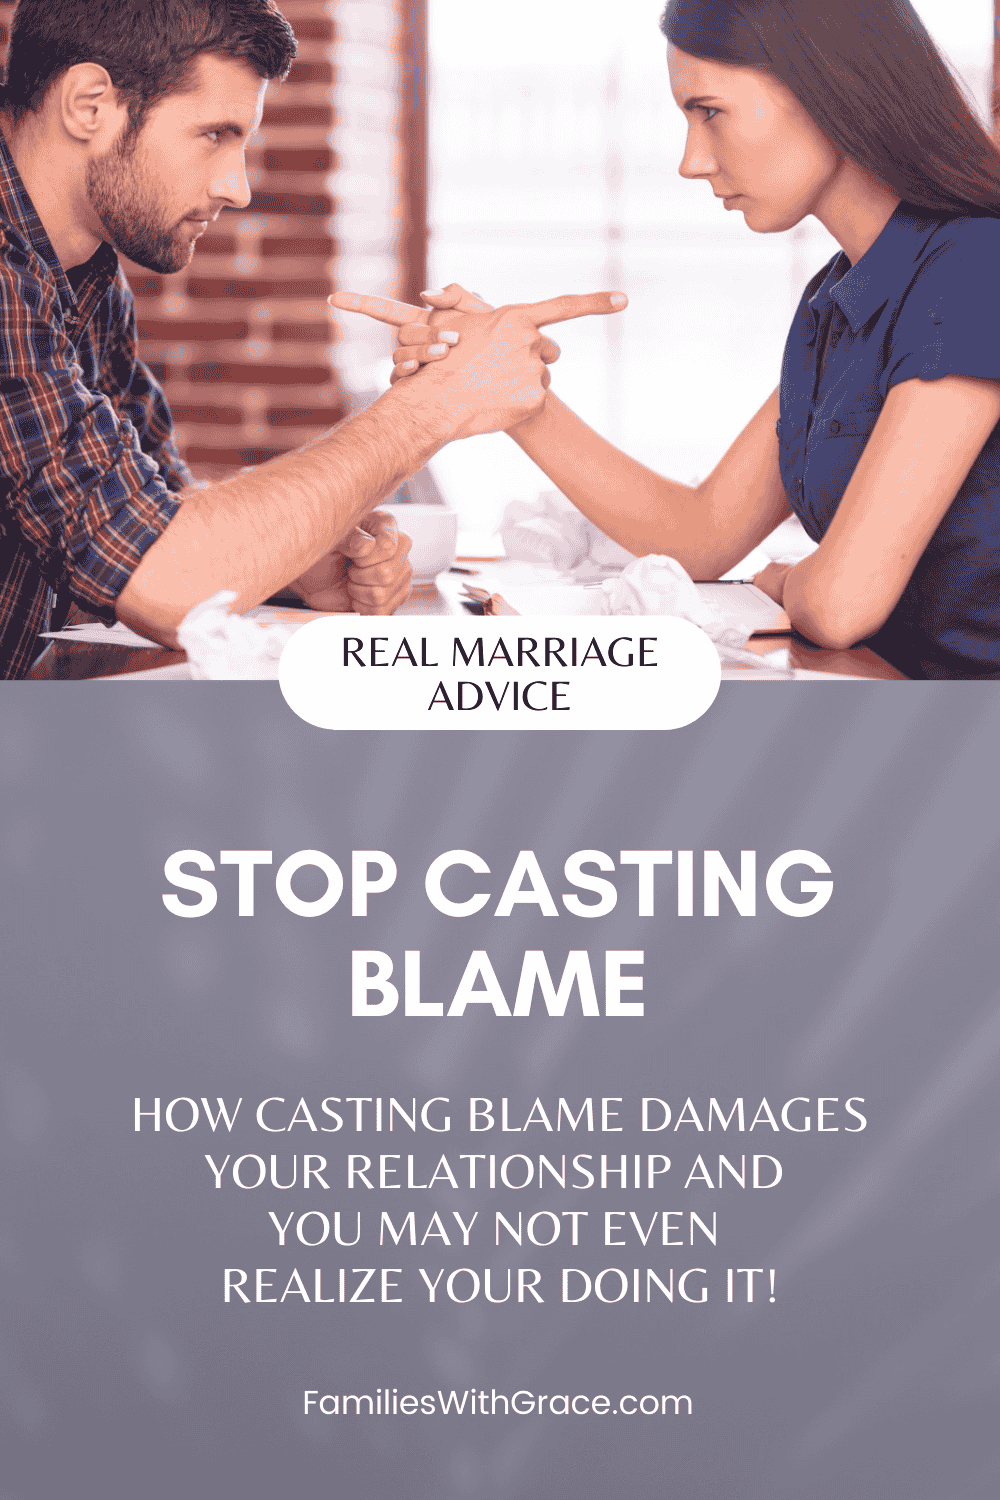 Real marriage advice: Stop casting blame